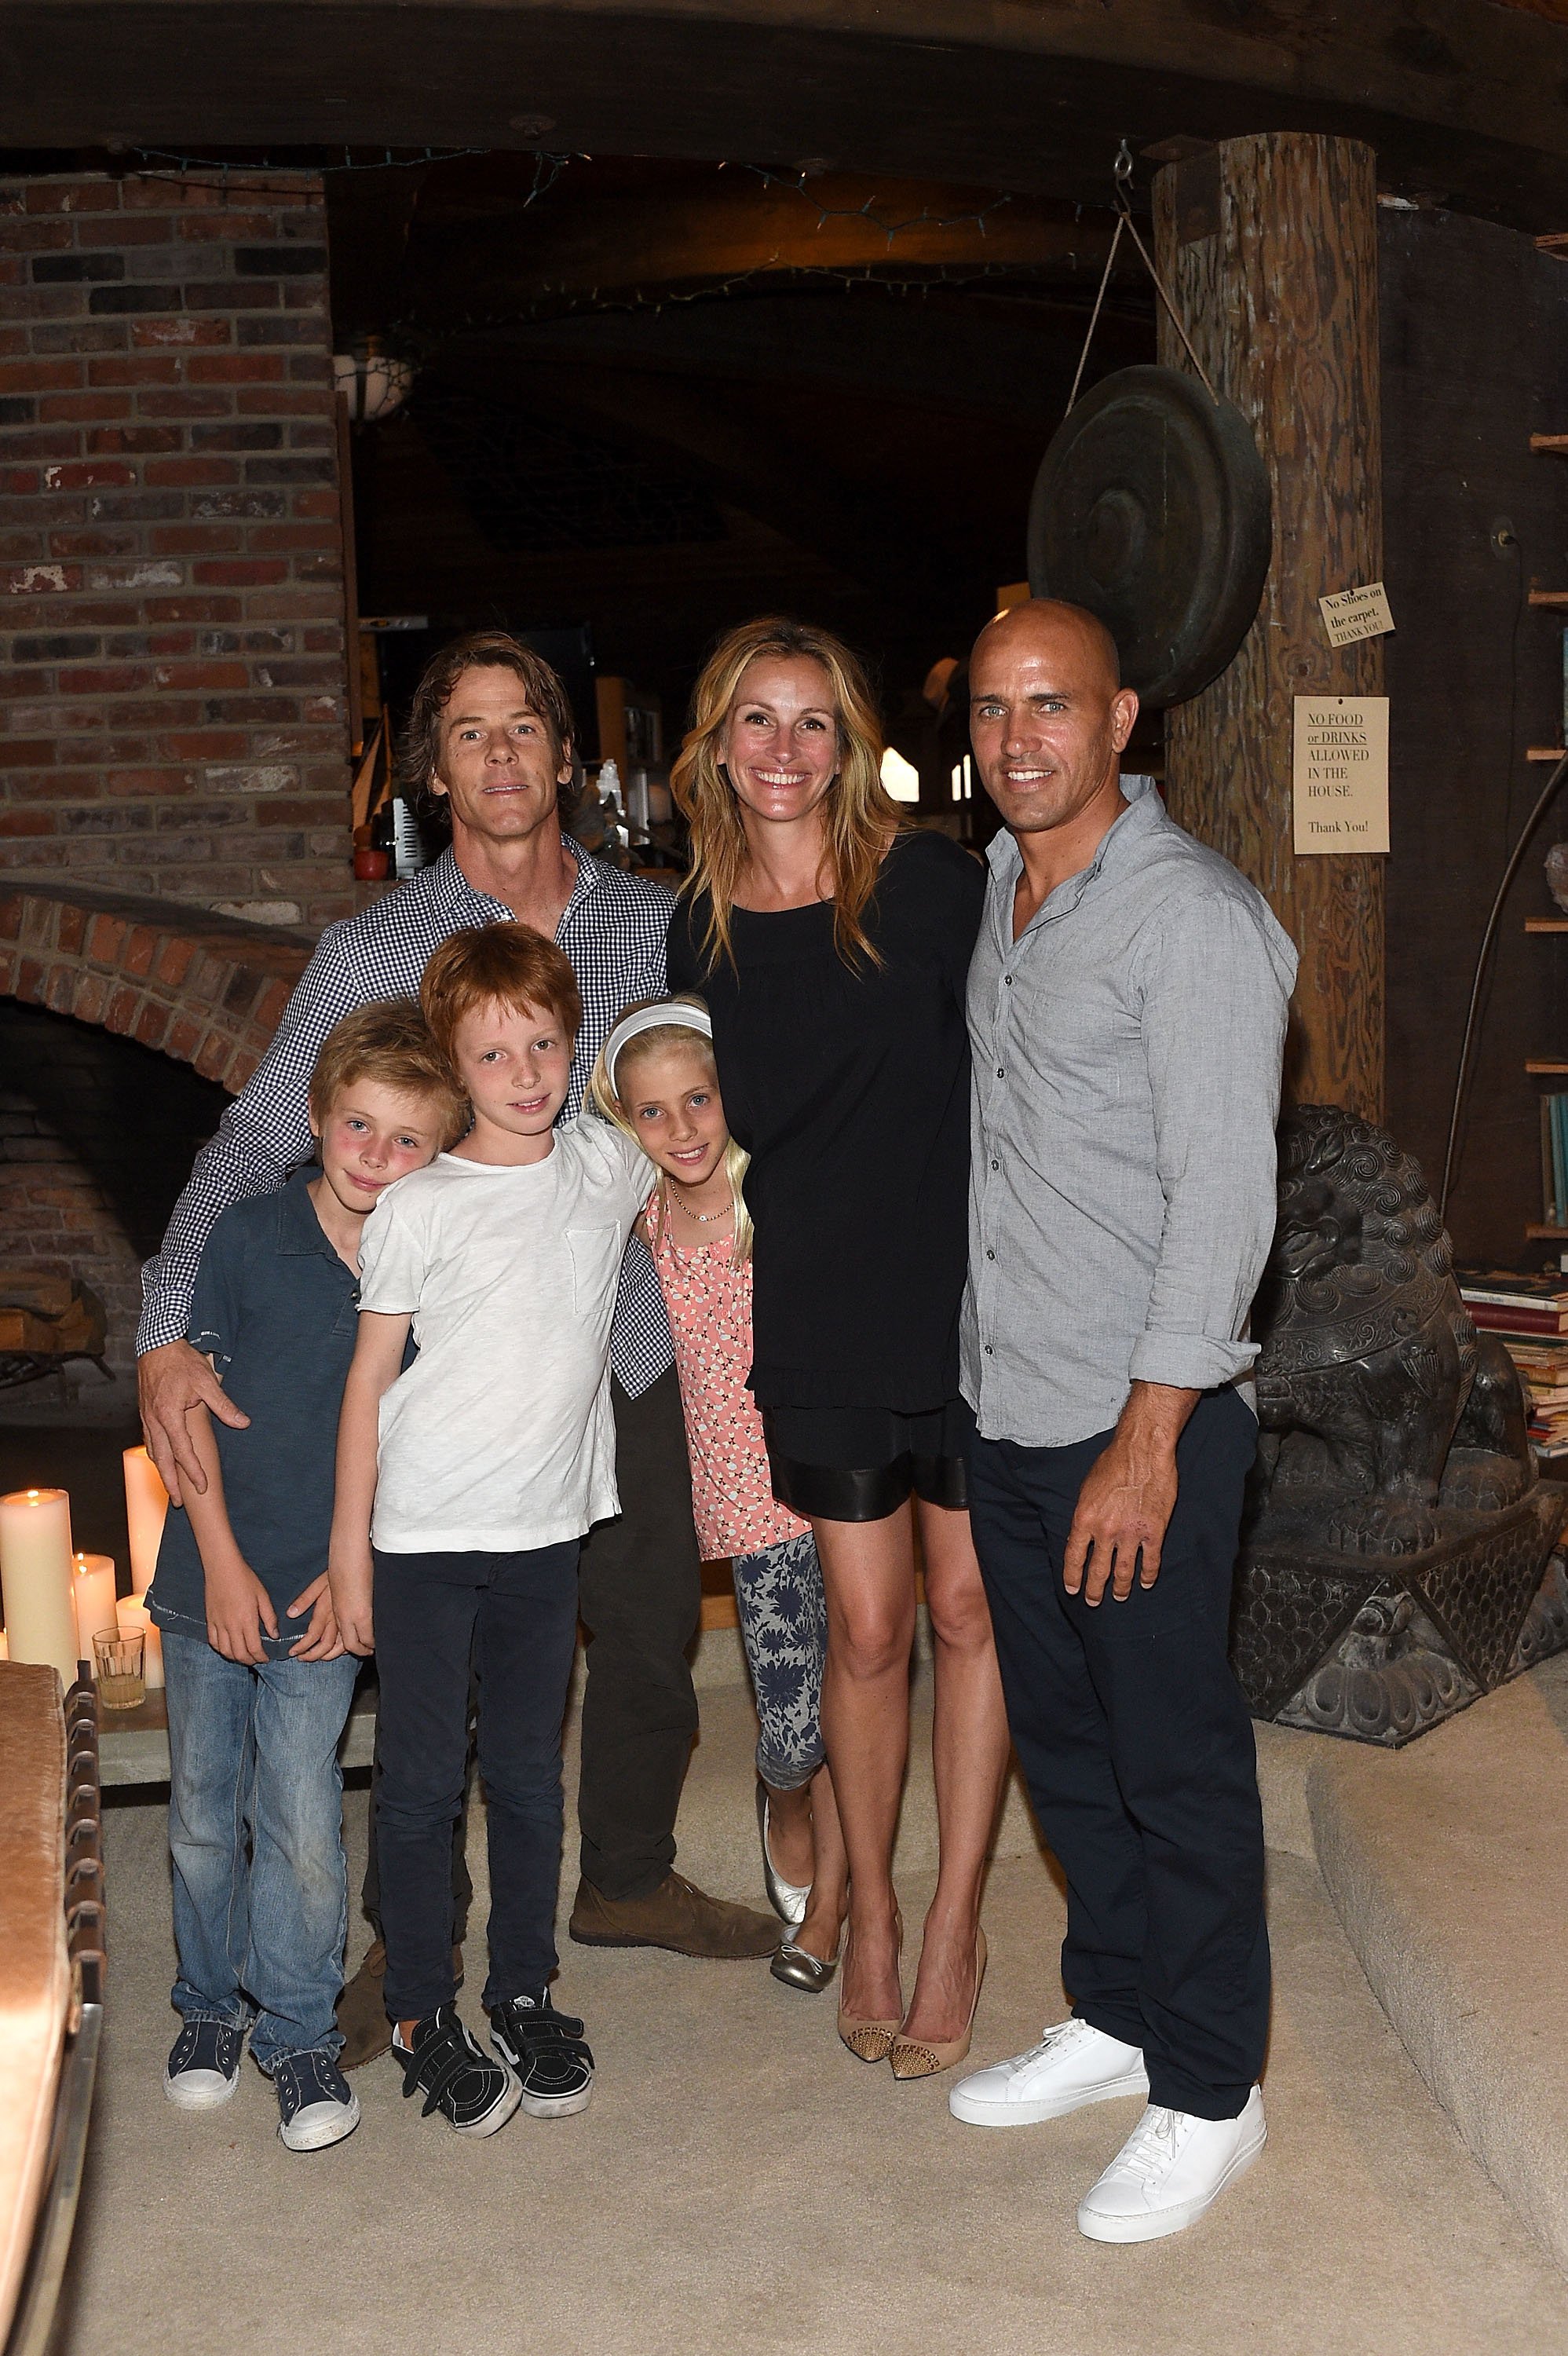  Daniel Moder, Julia Roberts, Kelly Slater, Phinnaeus Moder, Henry Daniel Moder and Hazel Moder attend Kelly Slater, John Moore and Friends Celebrate the Launch of Outerknown at Private Residence on August 29, 2015 in Malibu, California. | Source: Getty Images